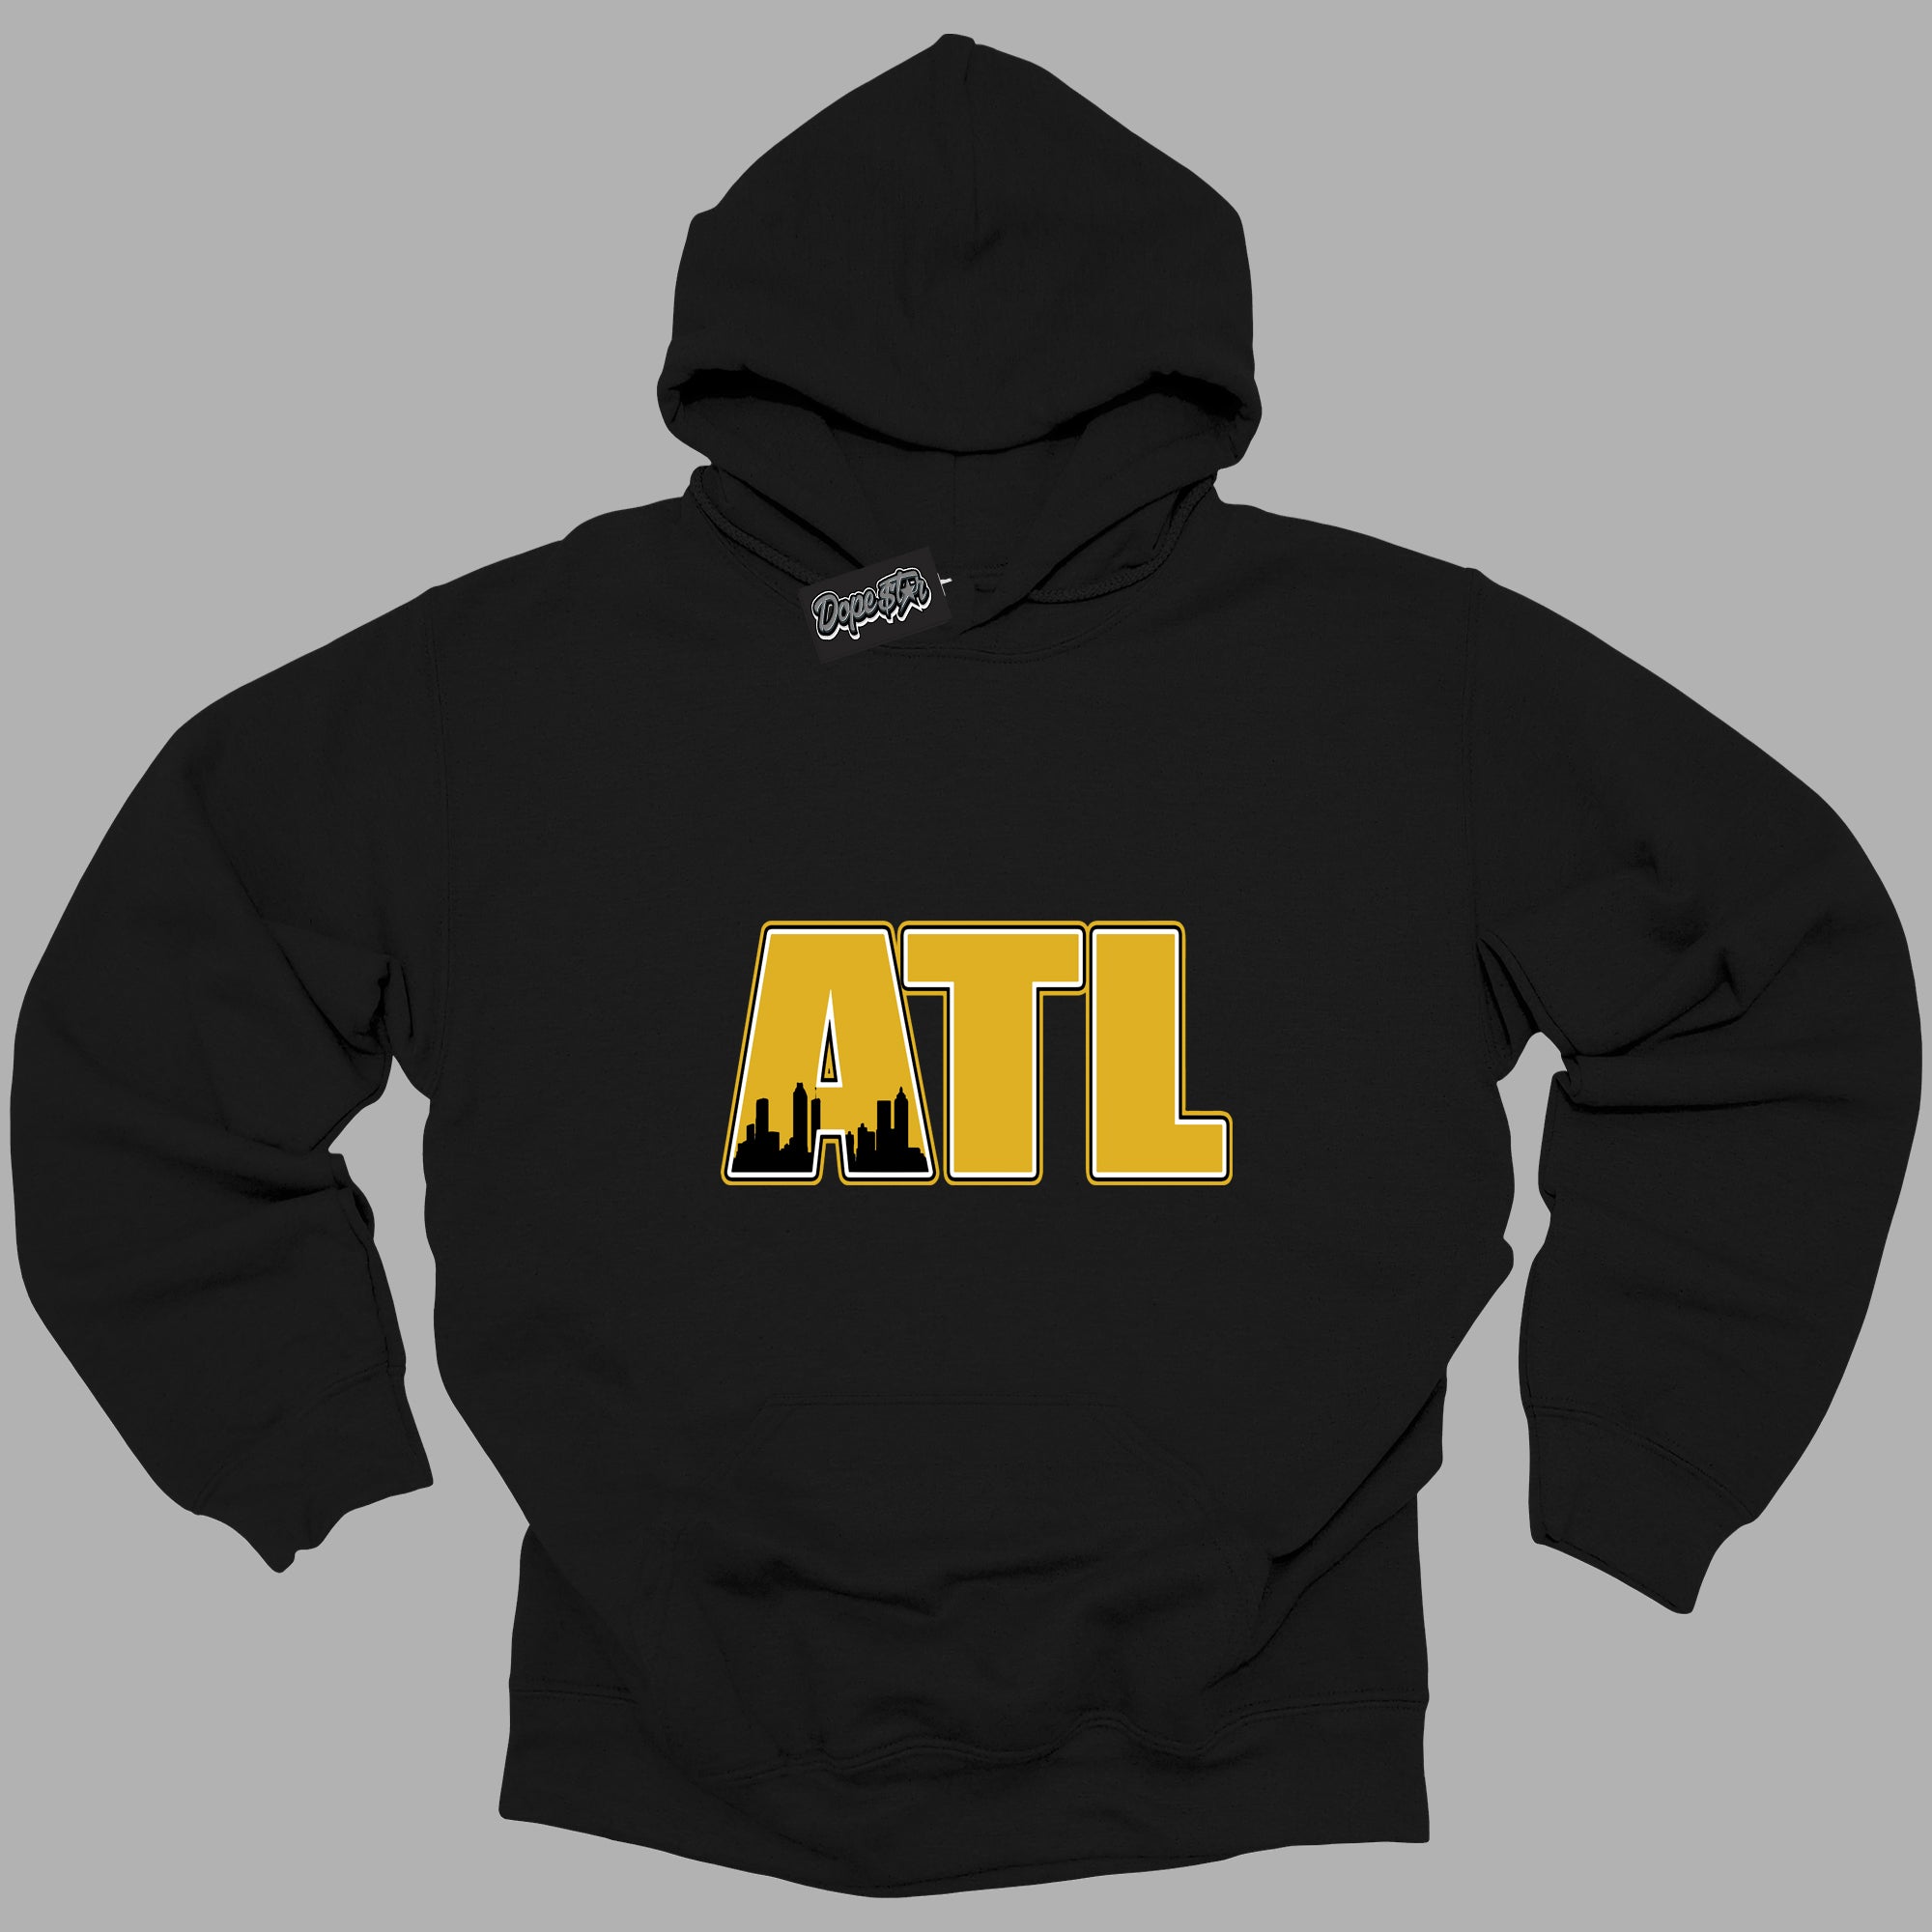 Cool Black Hoodie with “ Atlanta ”  design that Perfectly Matches Yellow Ochre 6s Sneakers.